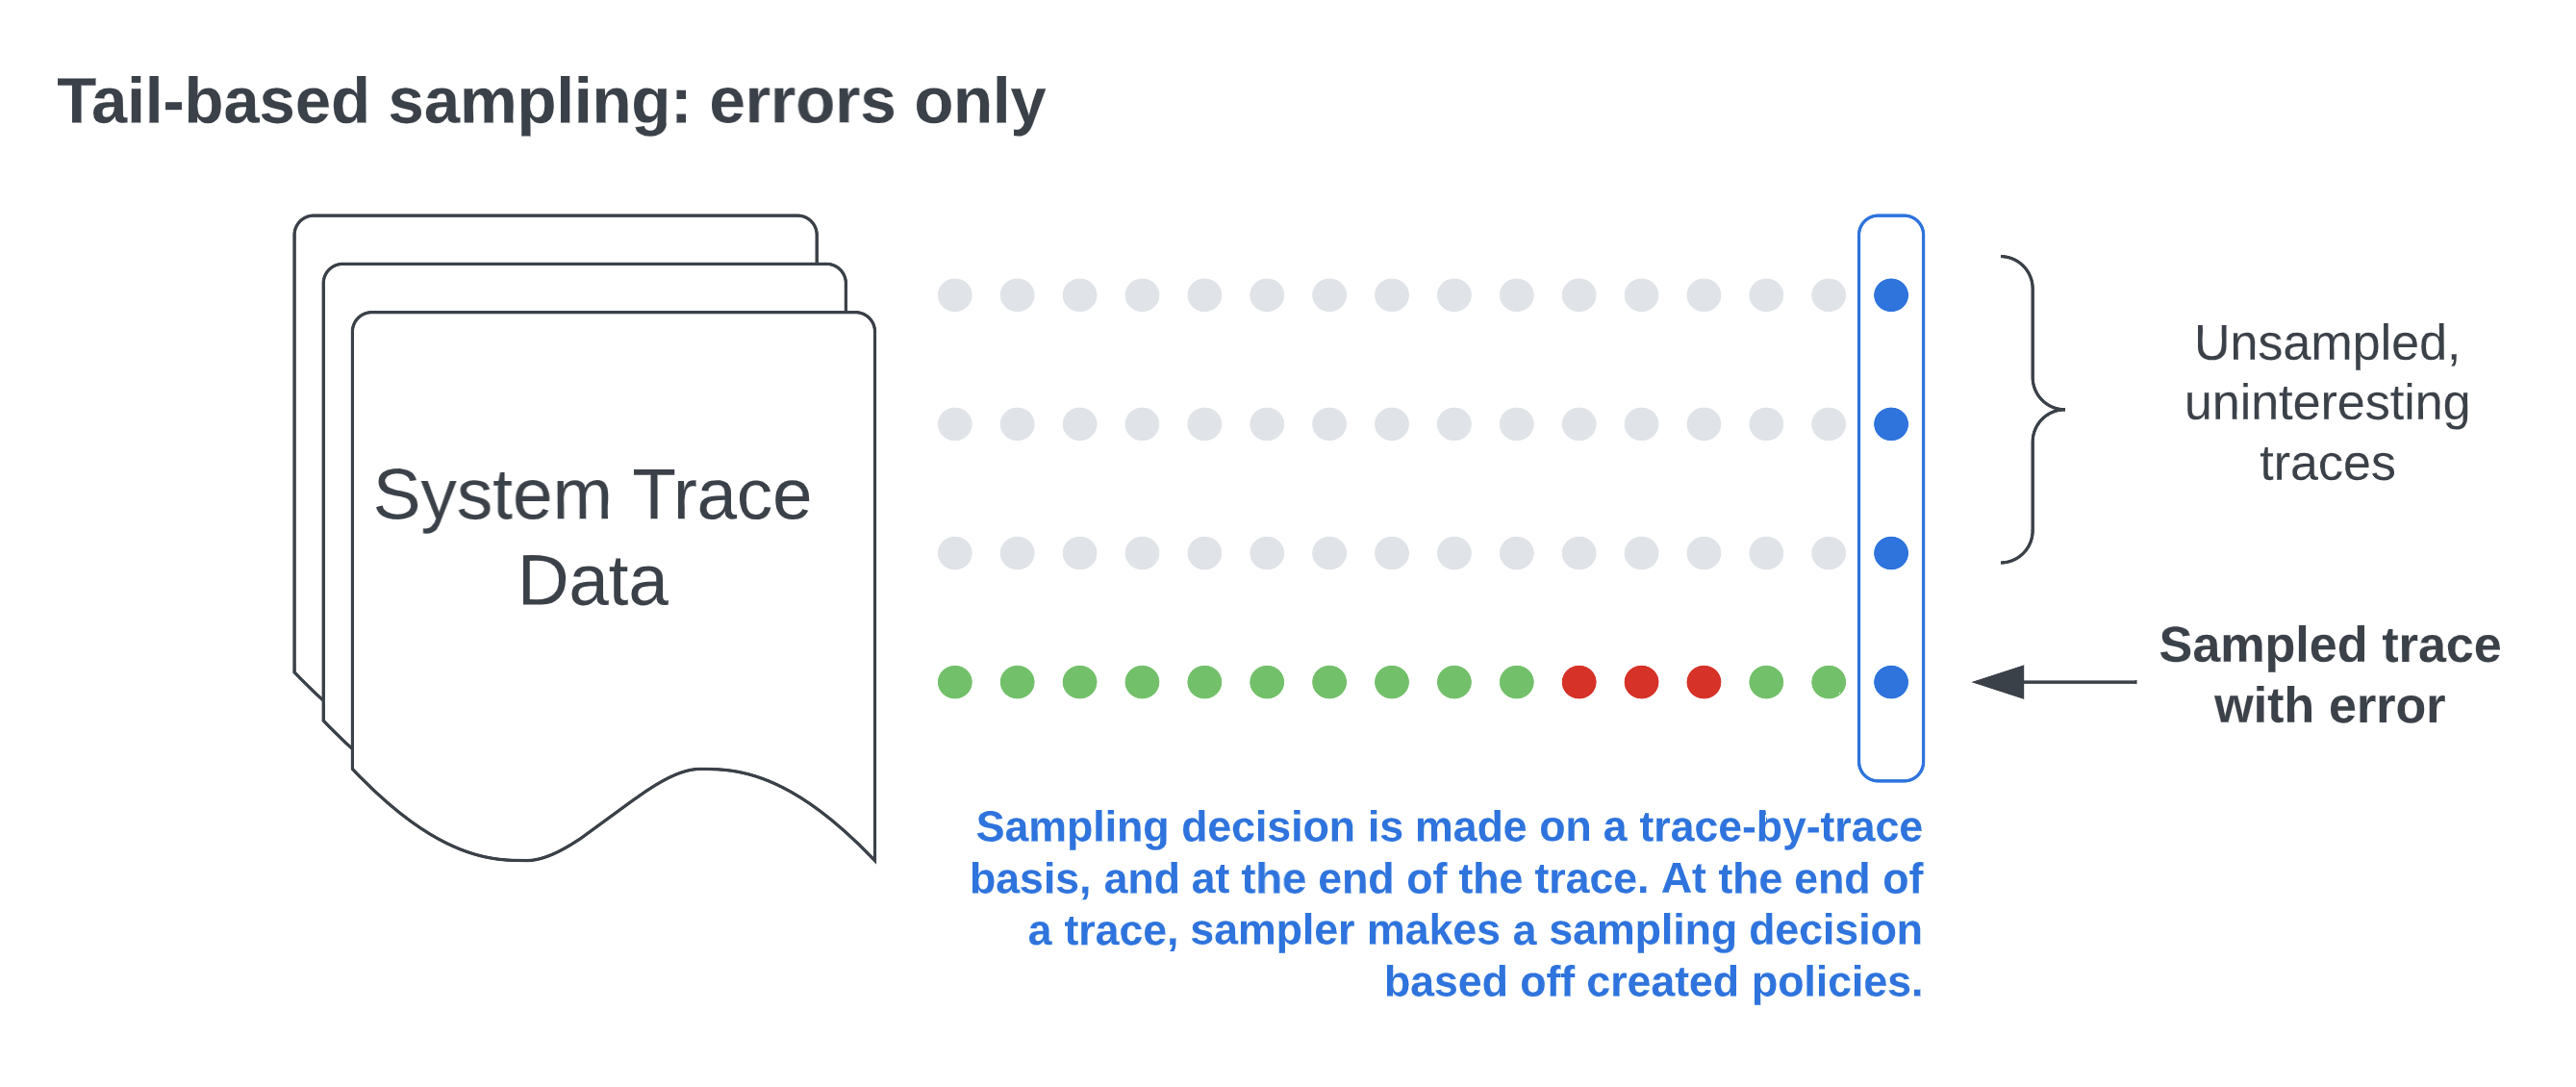 Illustration shows an example of tail sampling based on errors only, and not including random traces.